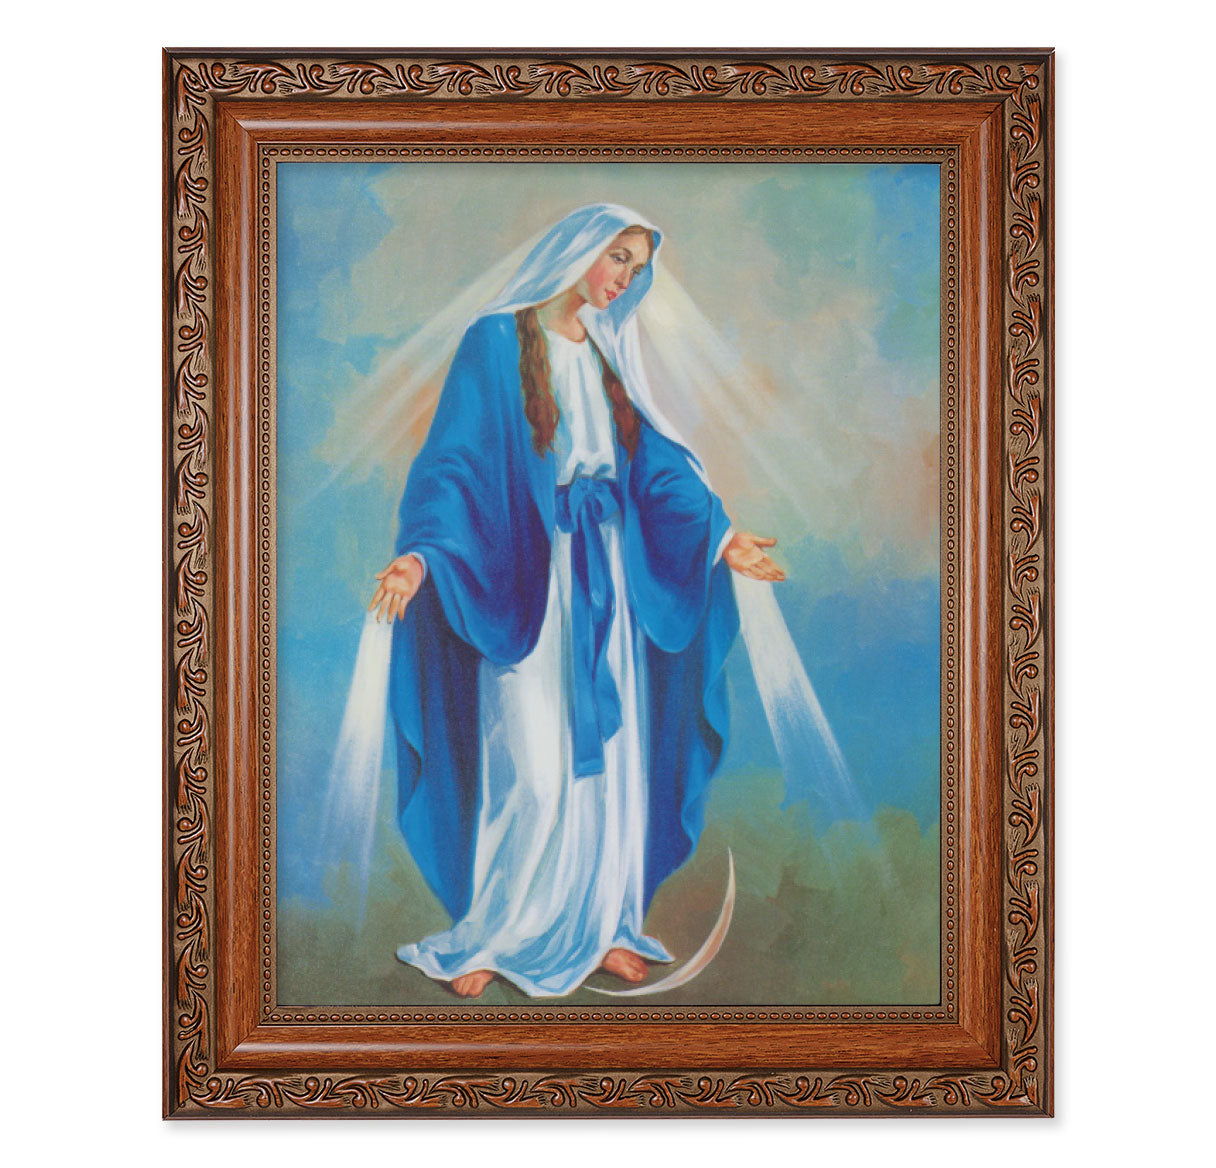 Our Lady of Grace Mahogany Finished Framed Art